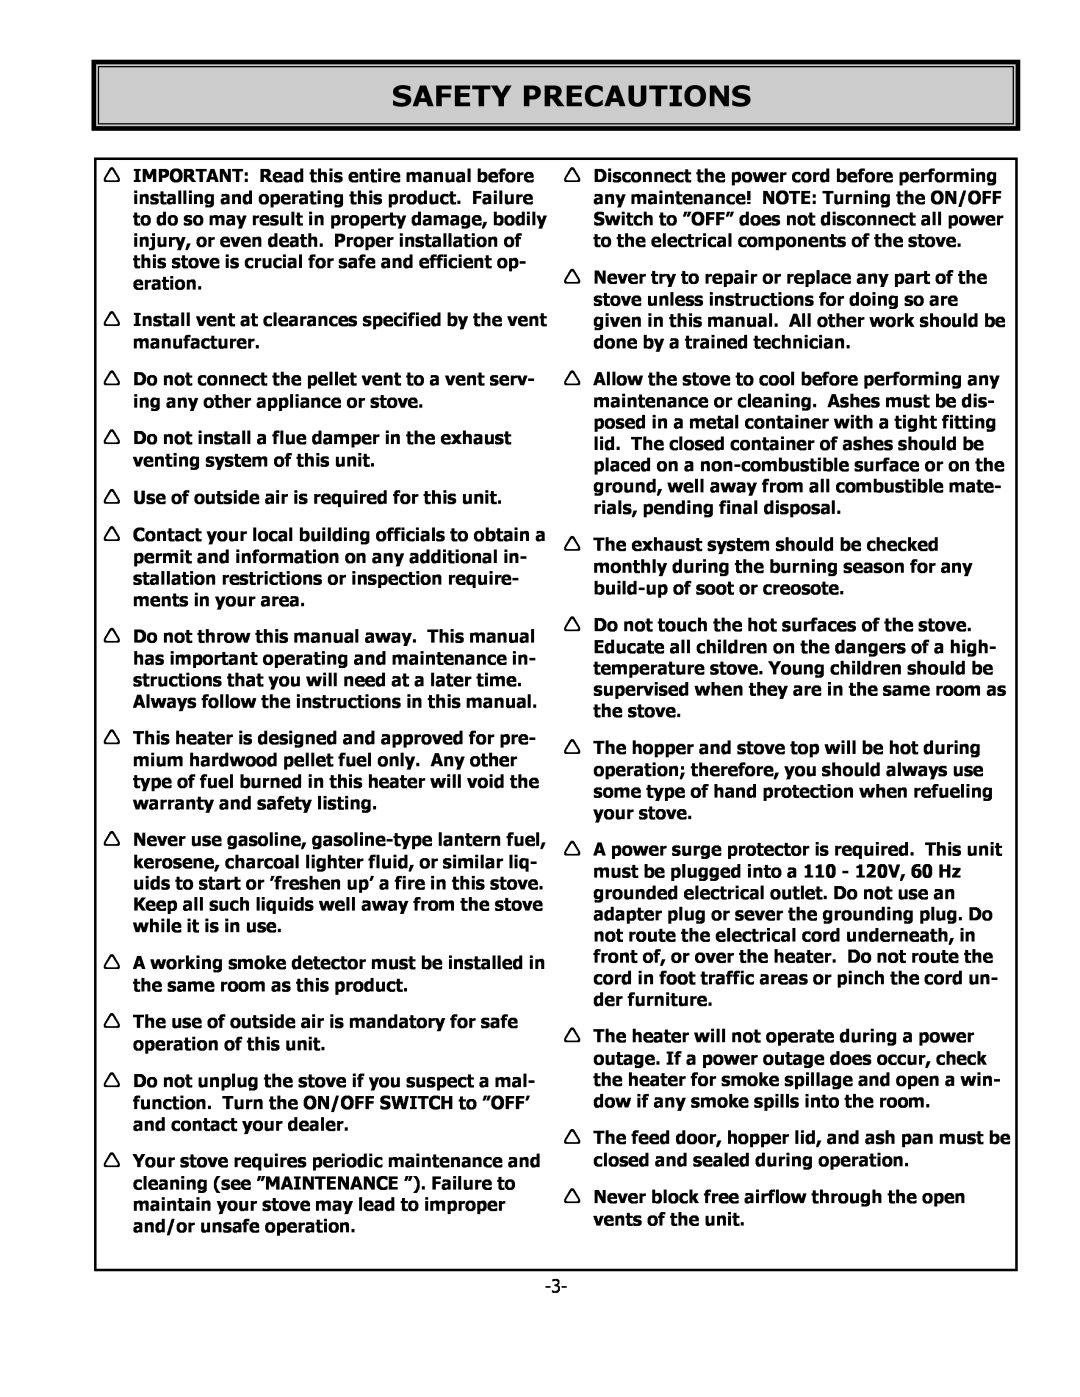 United States Stove 5700 owner manual Safety Precautions 